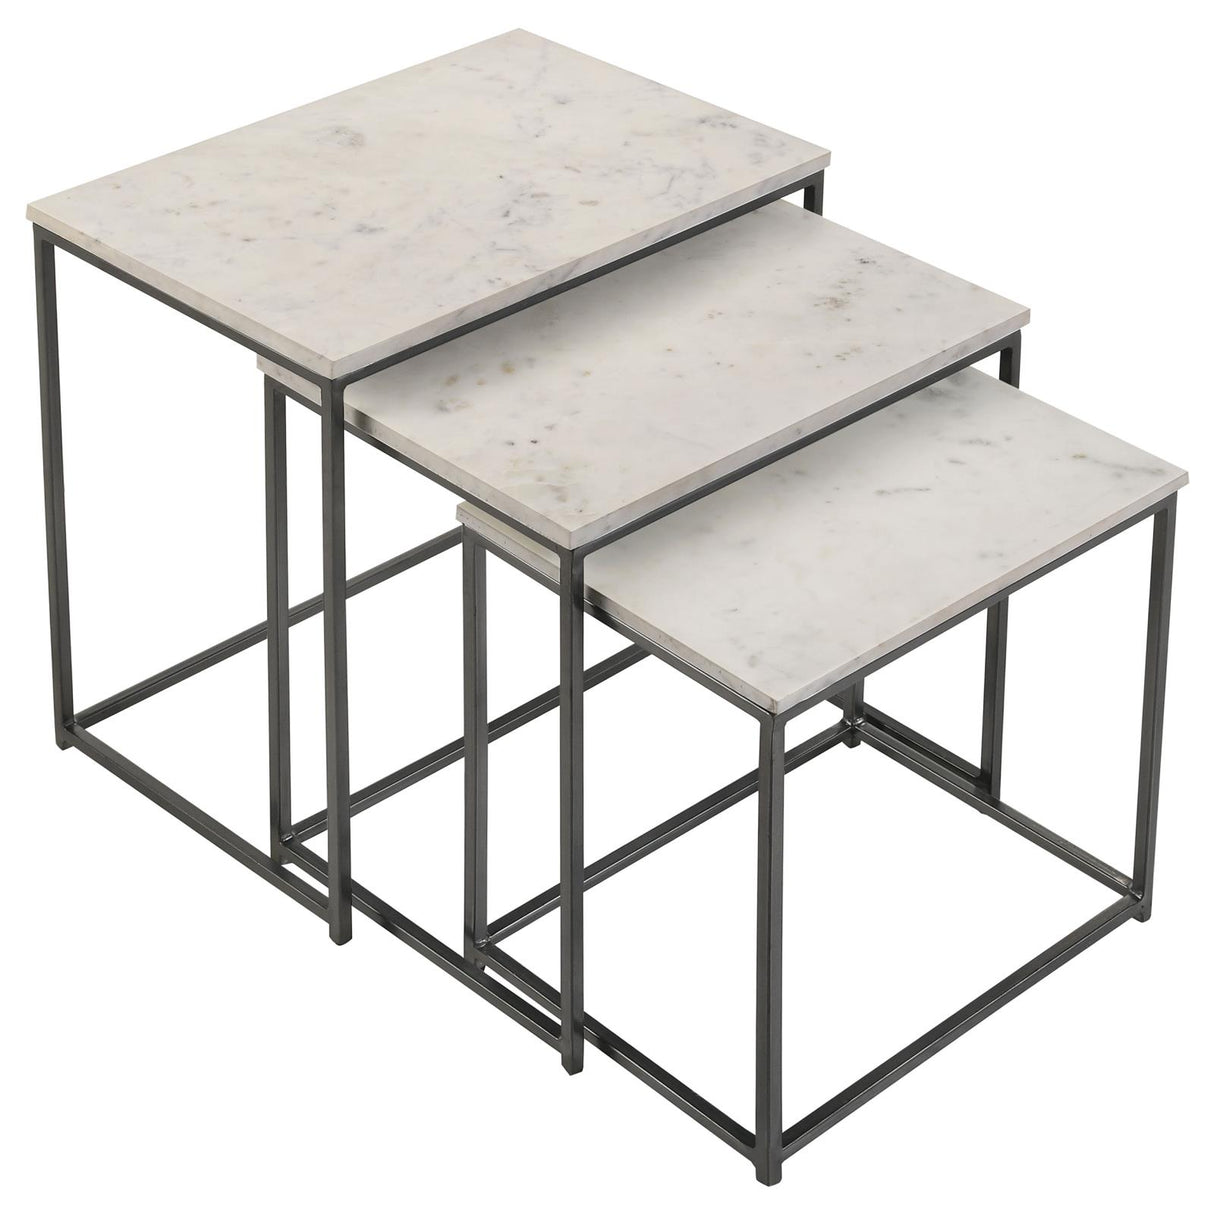 Caine 3-piece Nesting Table with Marble Top - 936016 - Luna Furniture